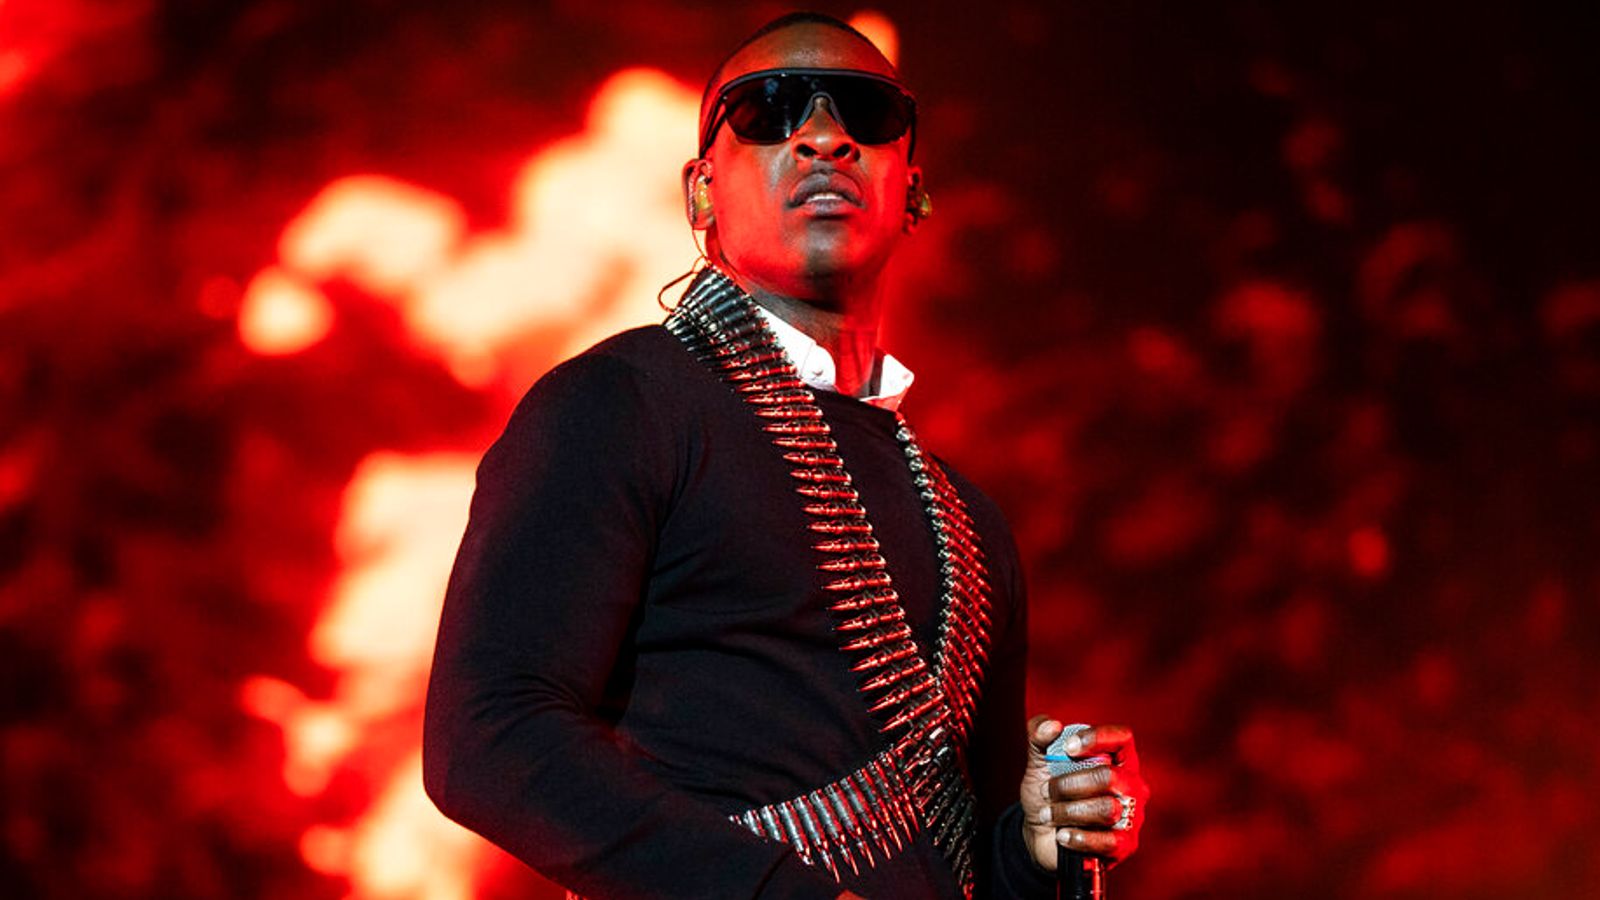 Rapper Skepta vows to be 'more mindful' as he removes artwork after Holocaust criticism